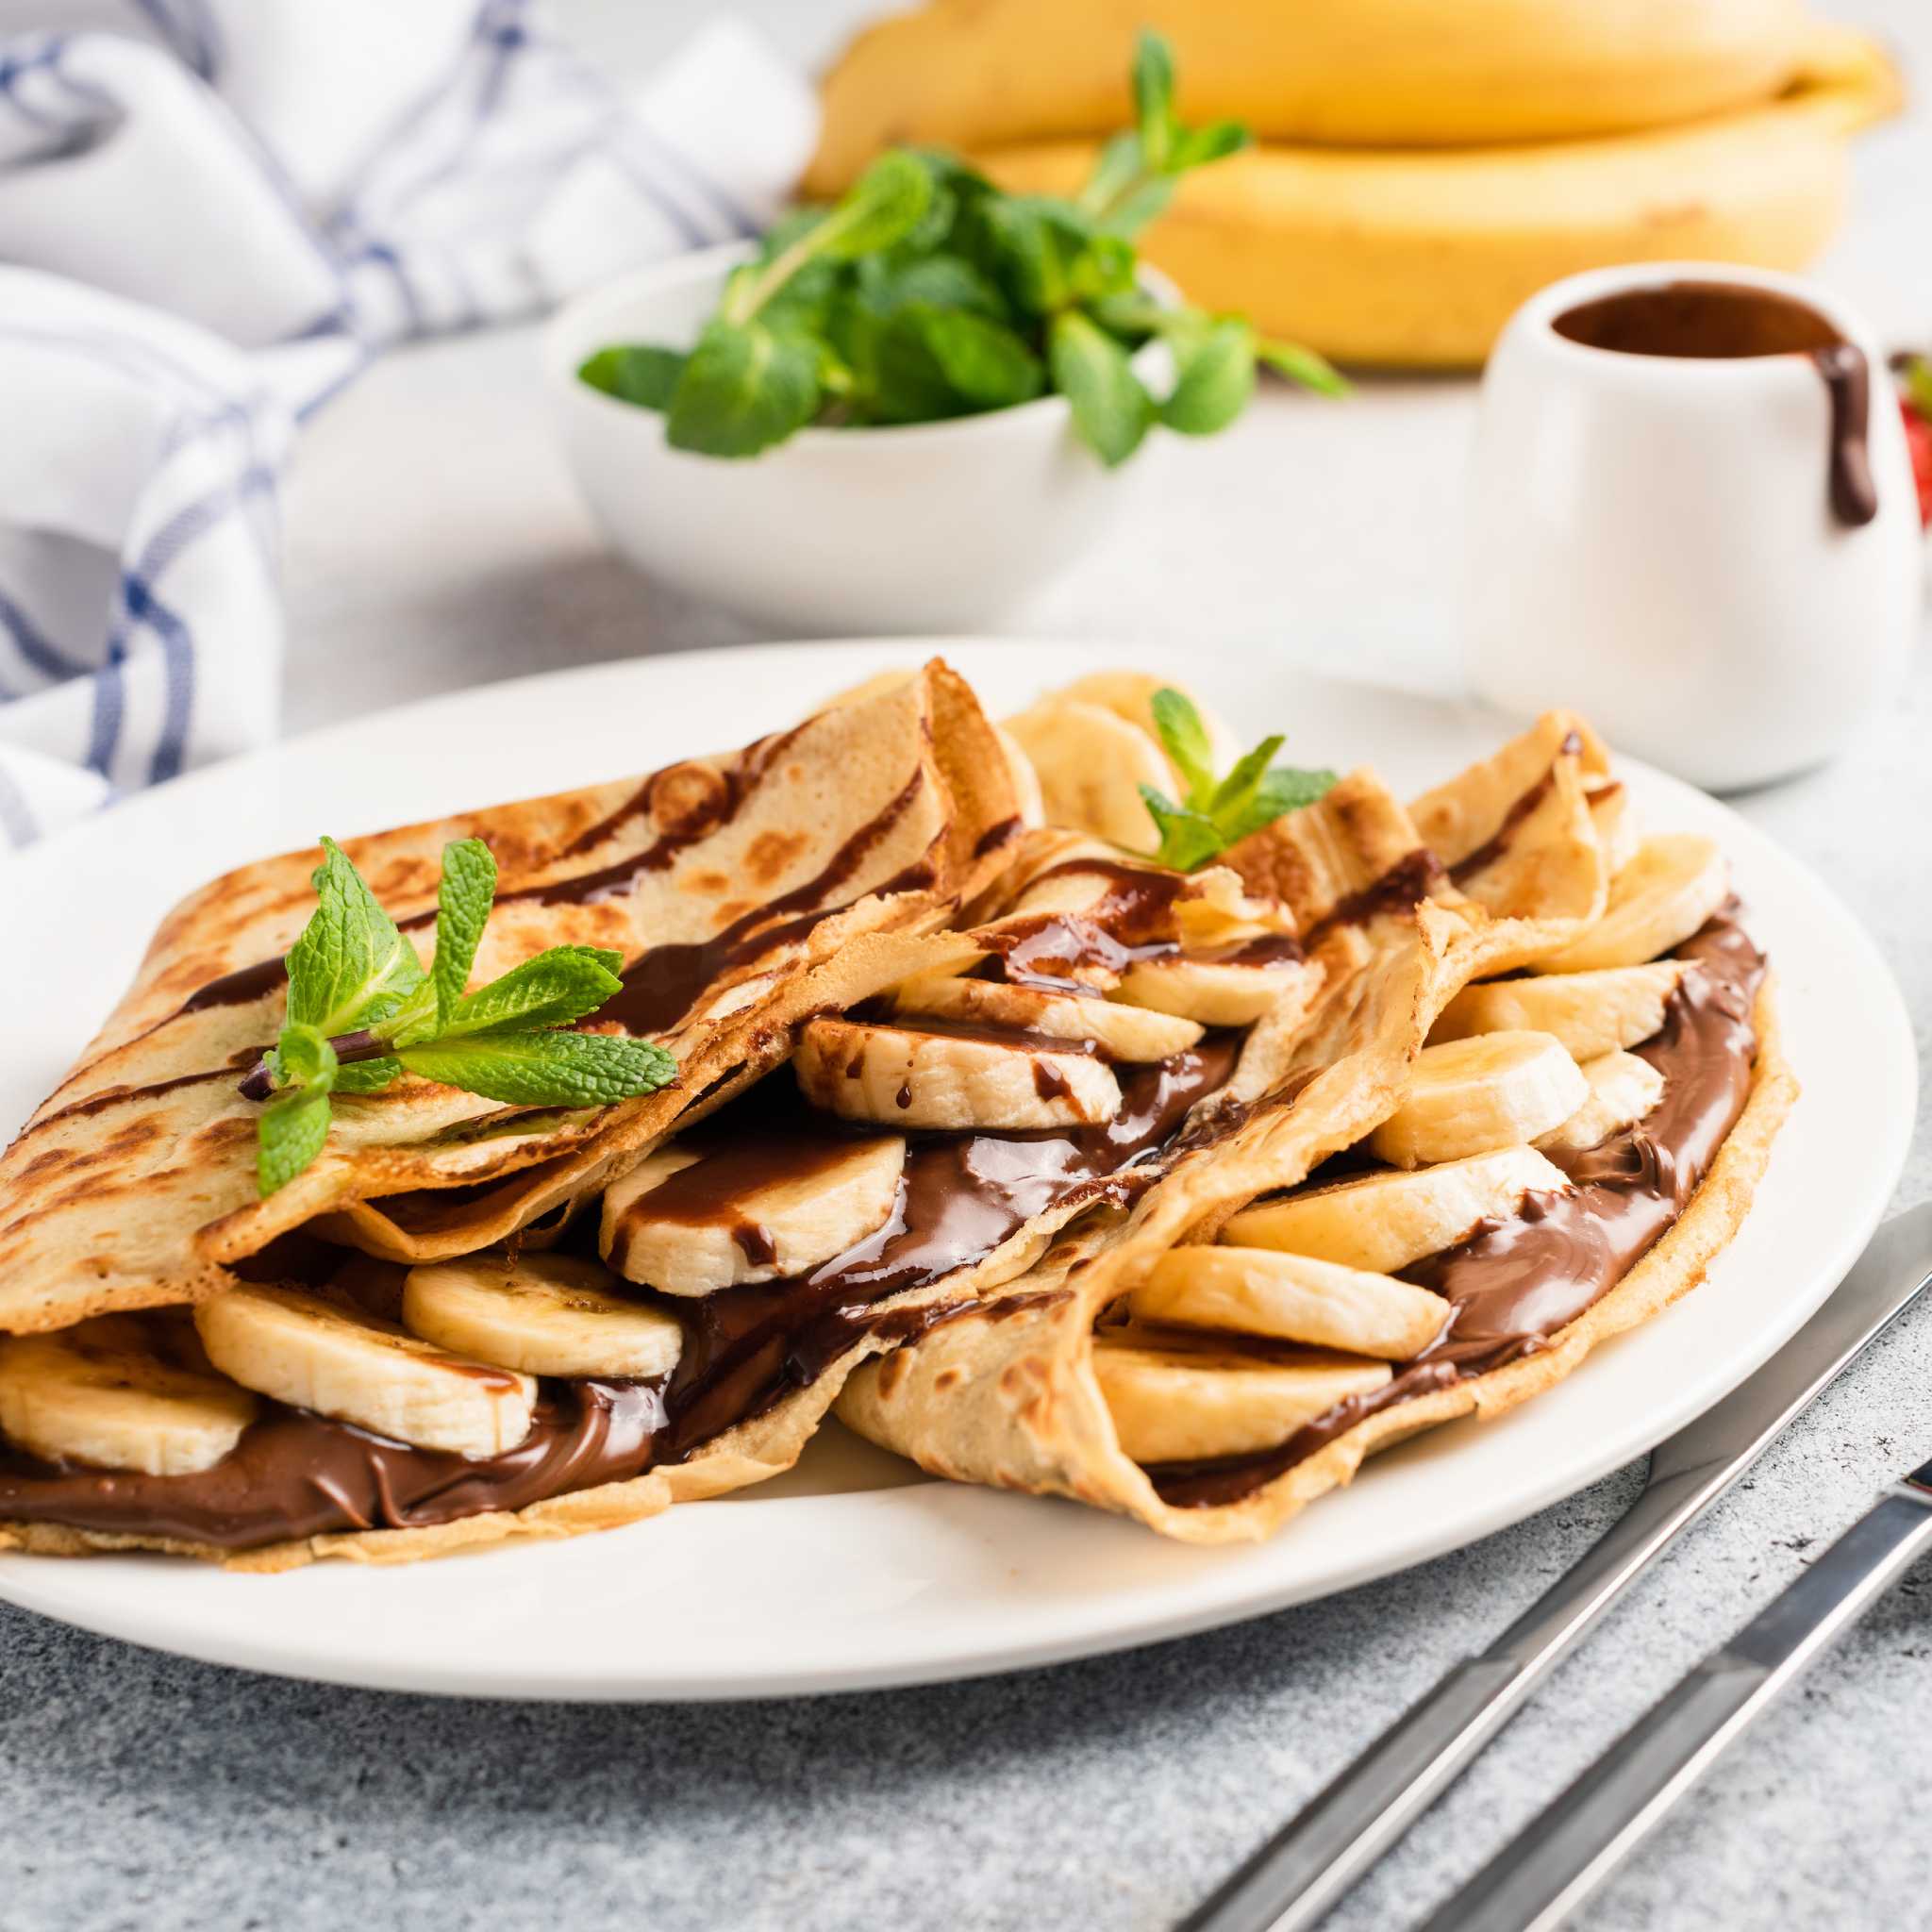 Crepes filled with Nutella and sliced banana and garnished with sprigs of mint